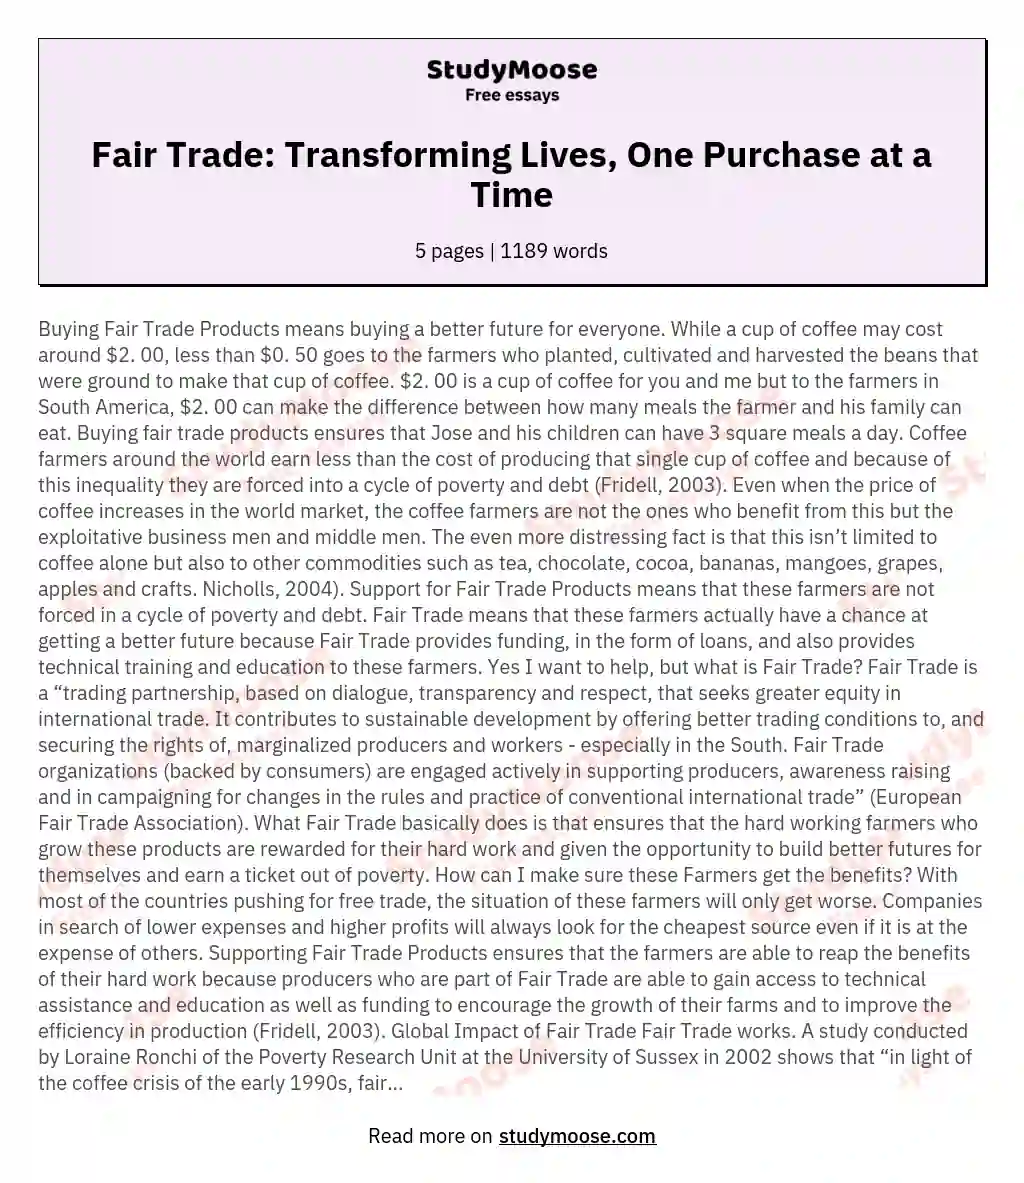 Fair Trade: Transforming Lives, One Purchase at a Time essay